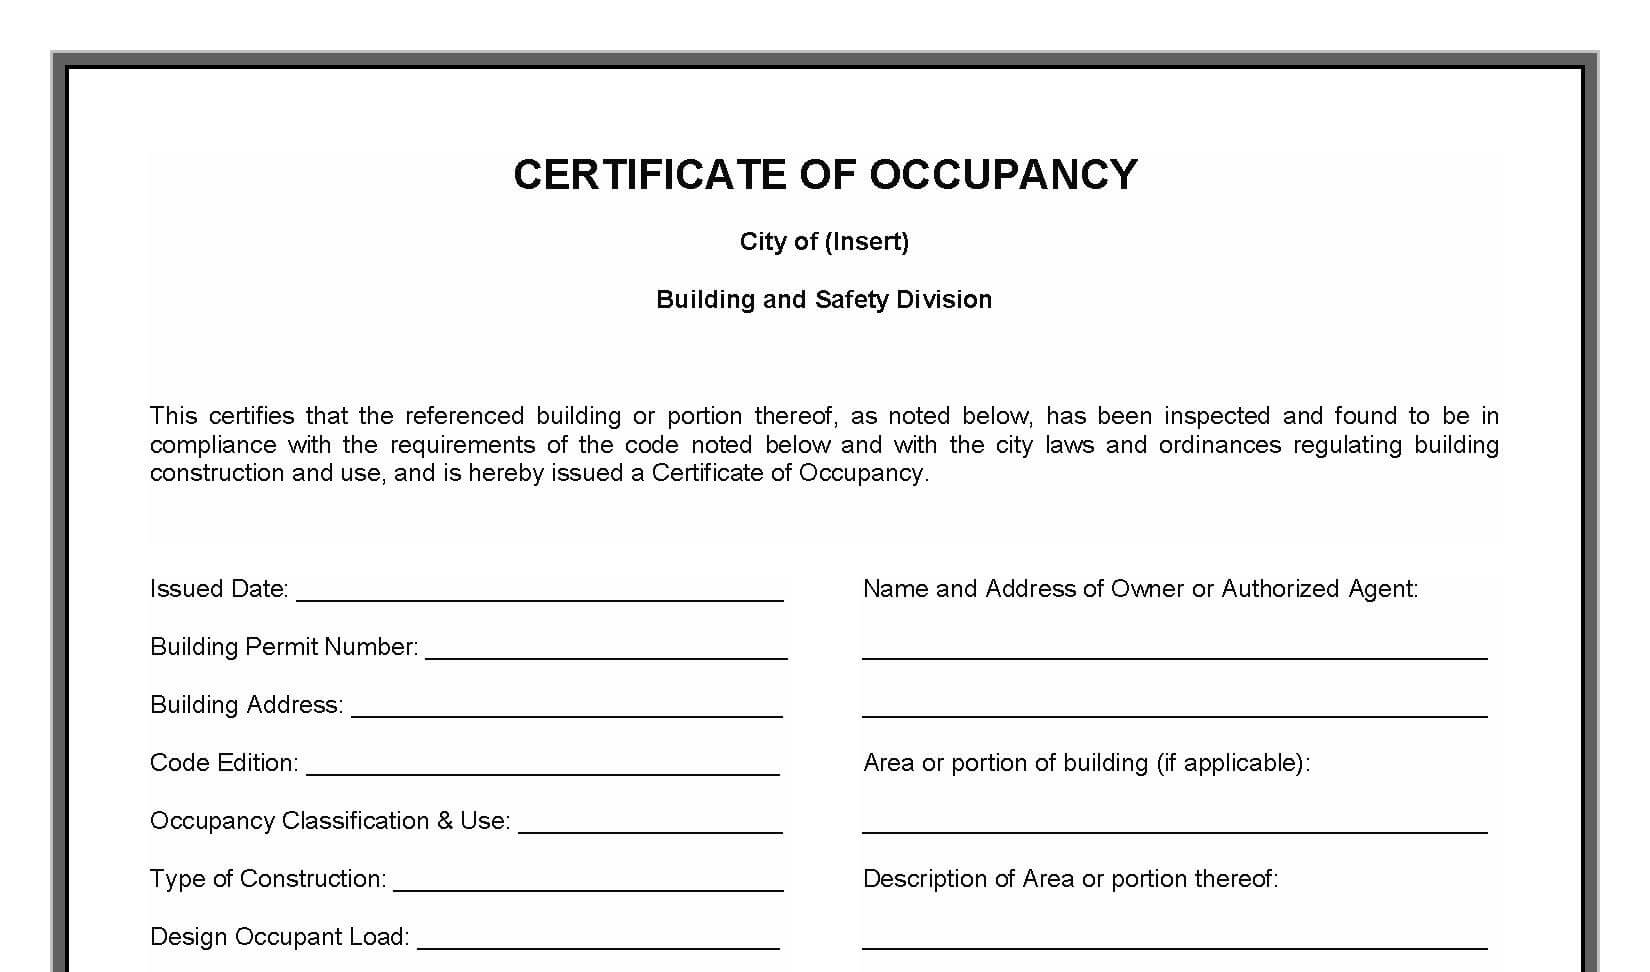 example of Certificate of Occupancy